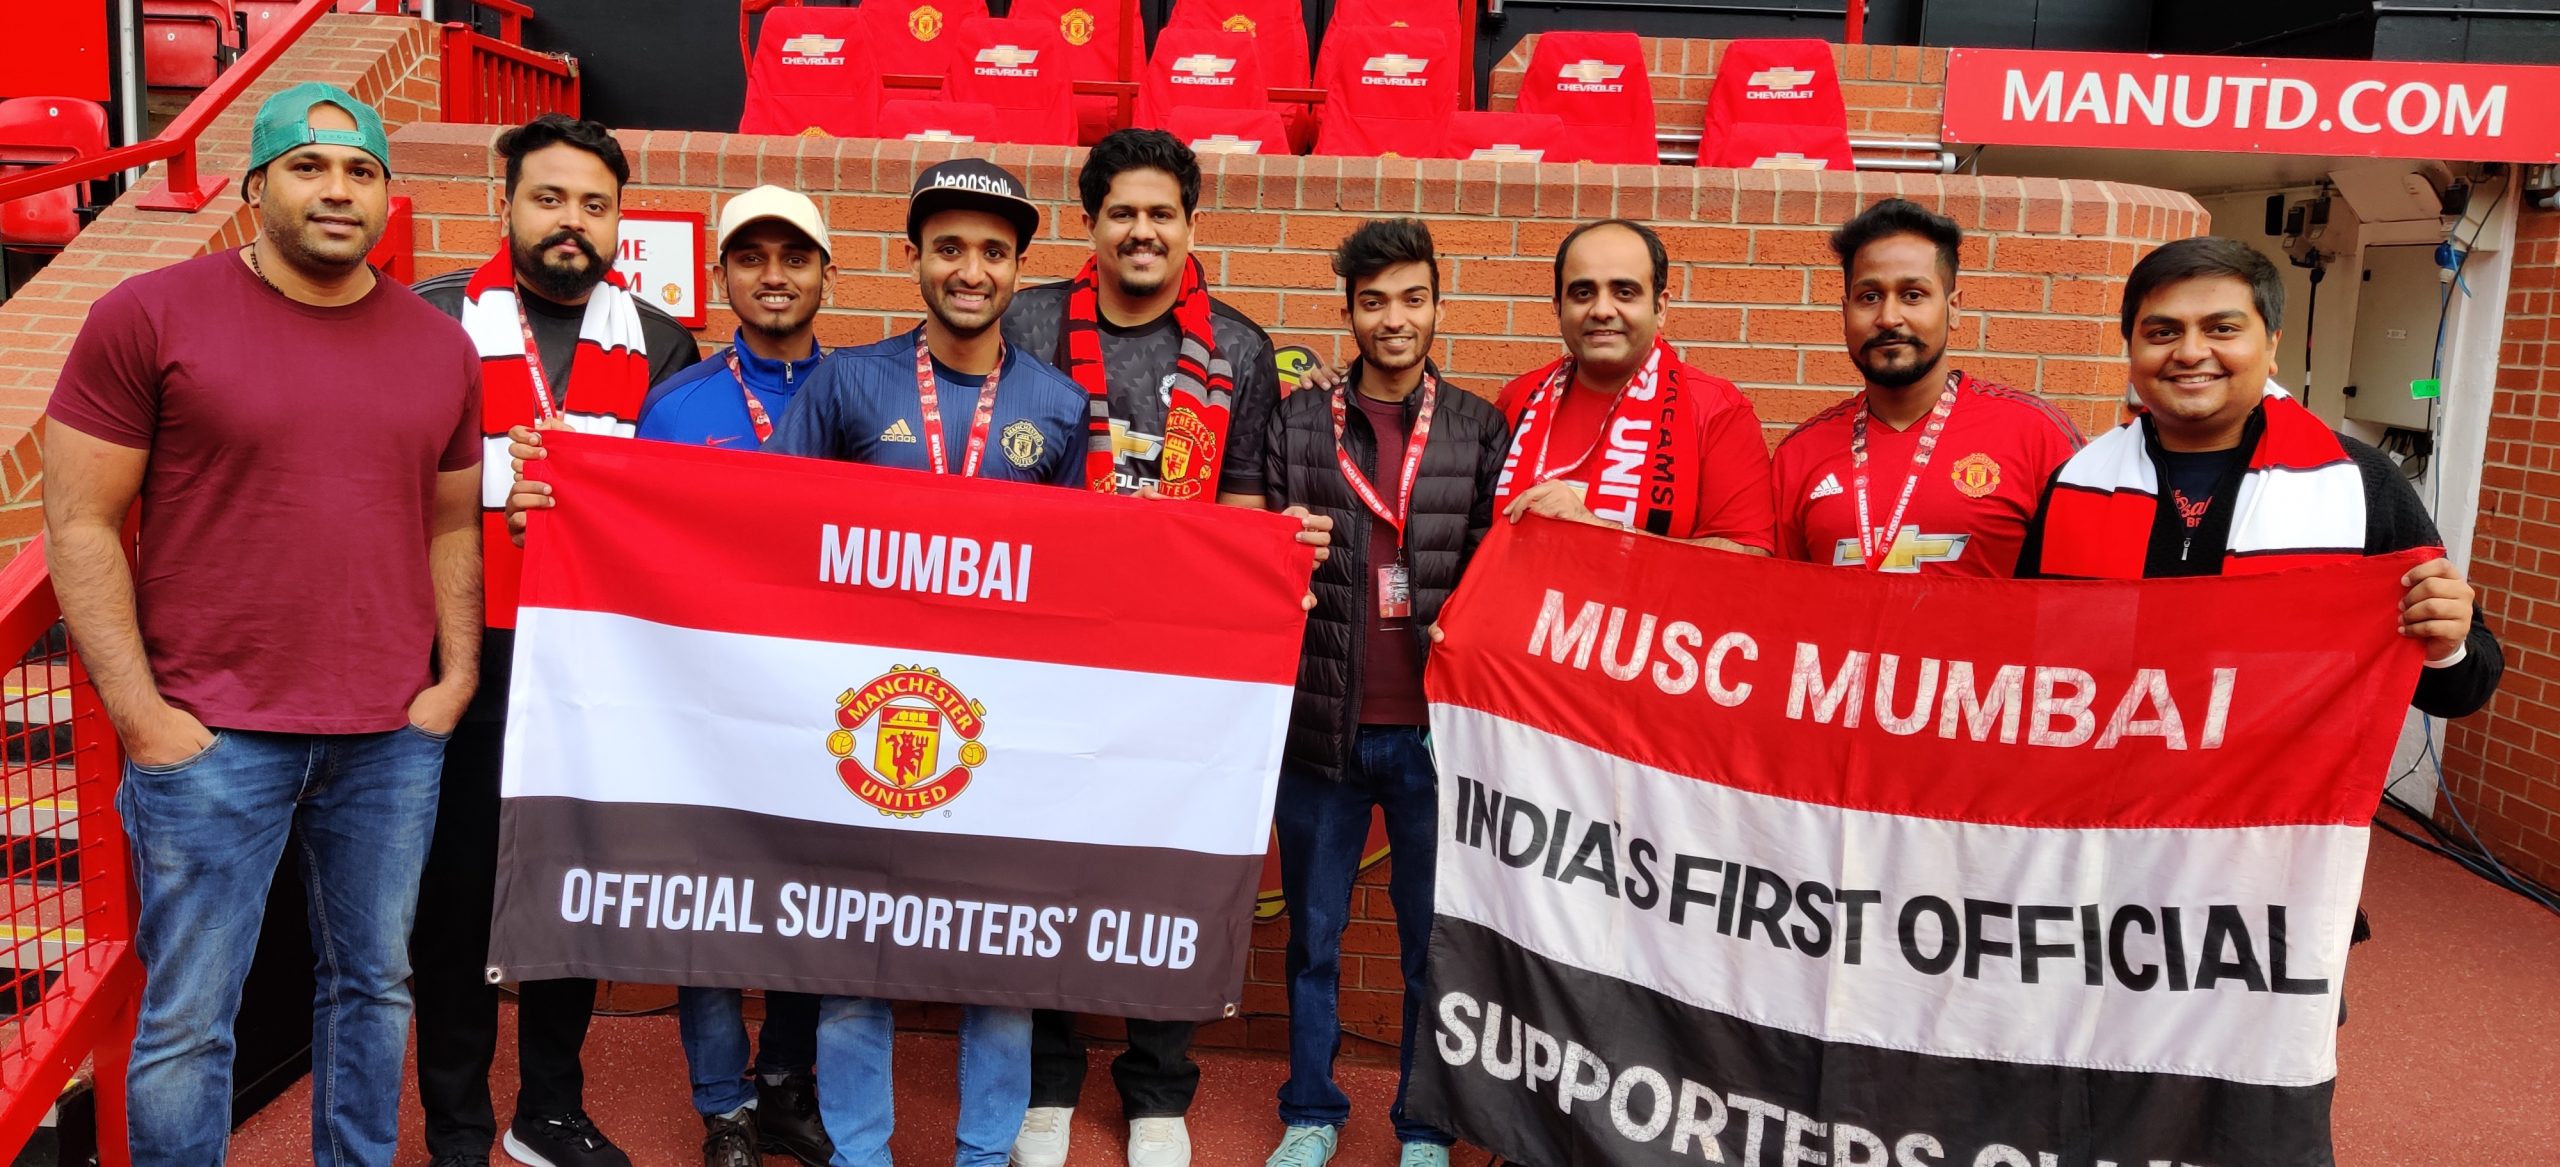 Manchester United goes above and beyond during COVID-19 pandemic – utdreport